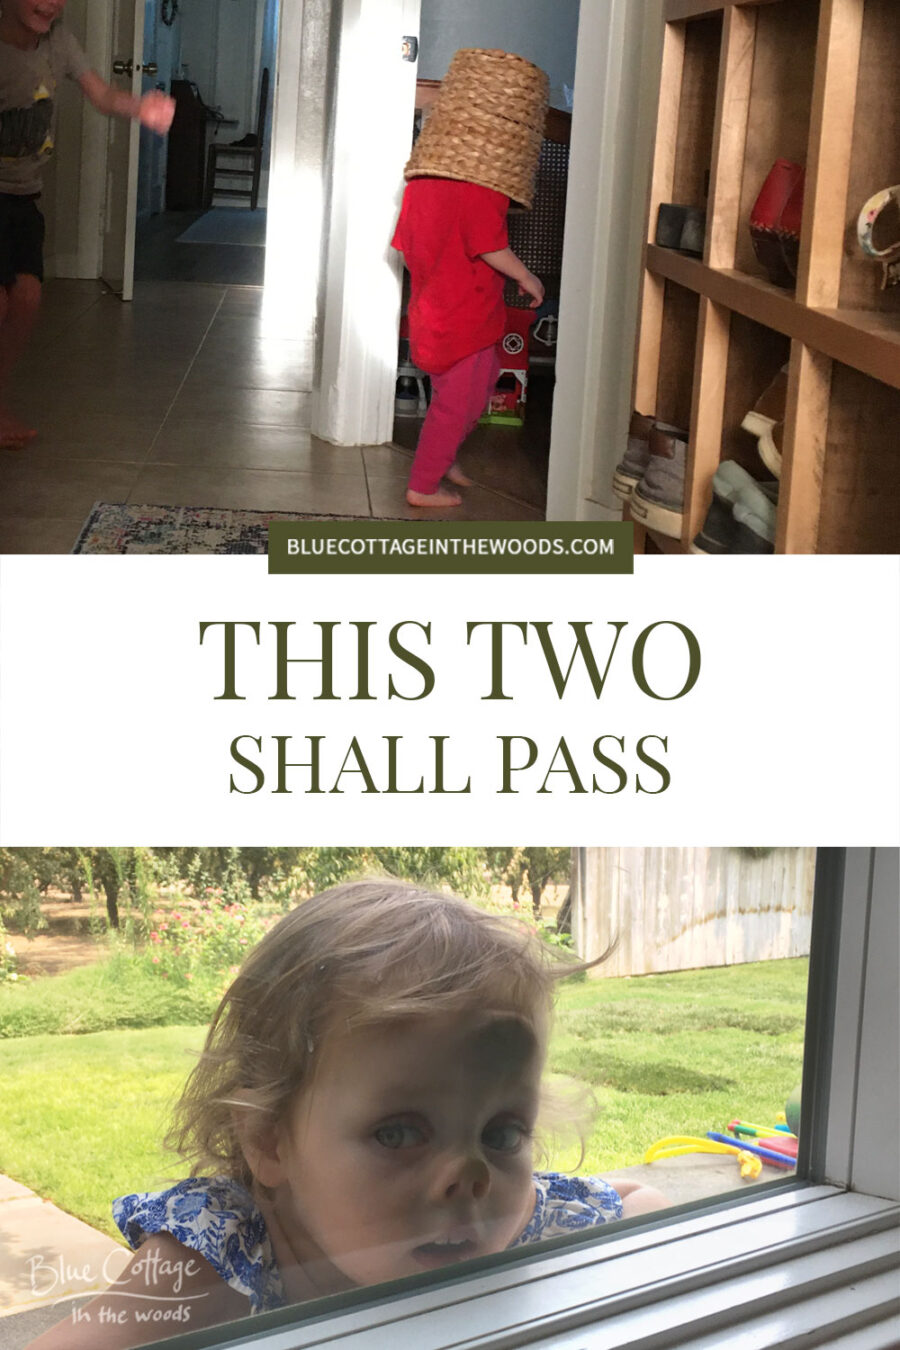 this-two-shall-pass-1